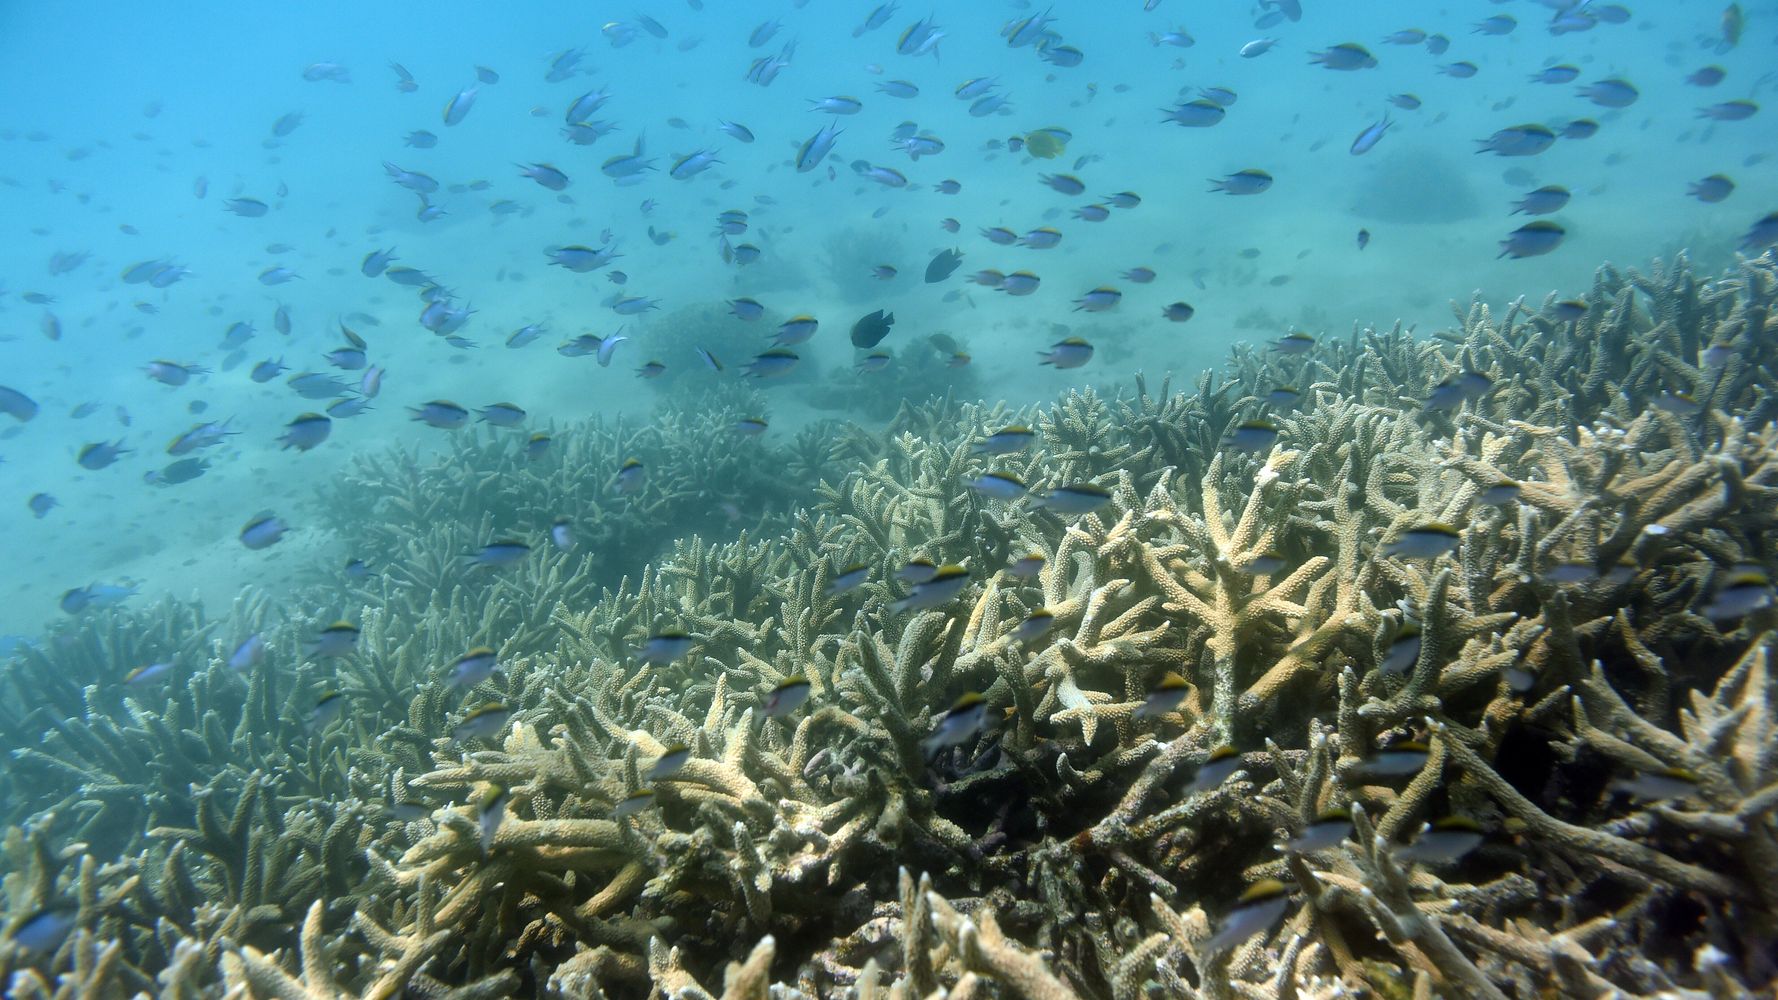 Australia's Great Barrier Reef Suffers Its Most Extensive Coral Bleaching Event